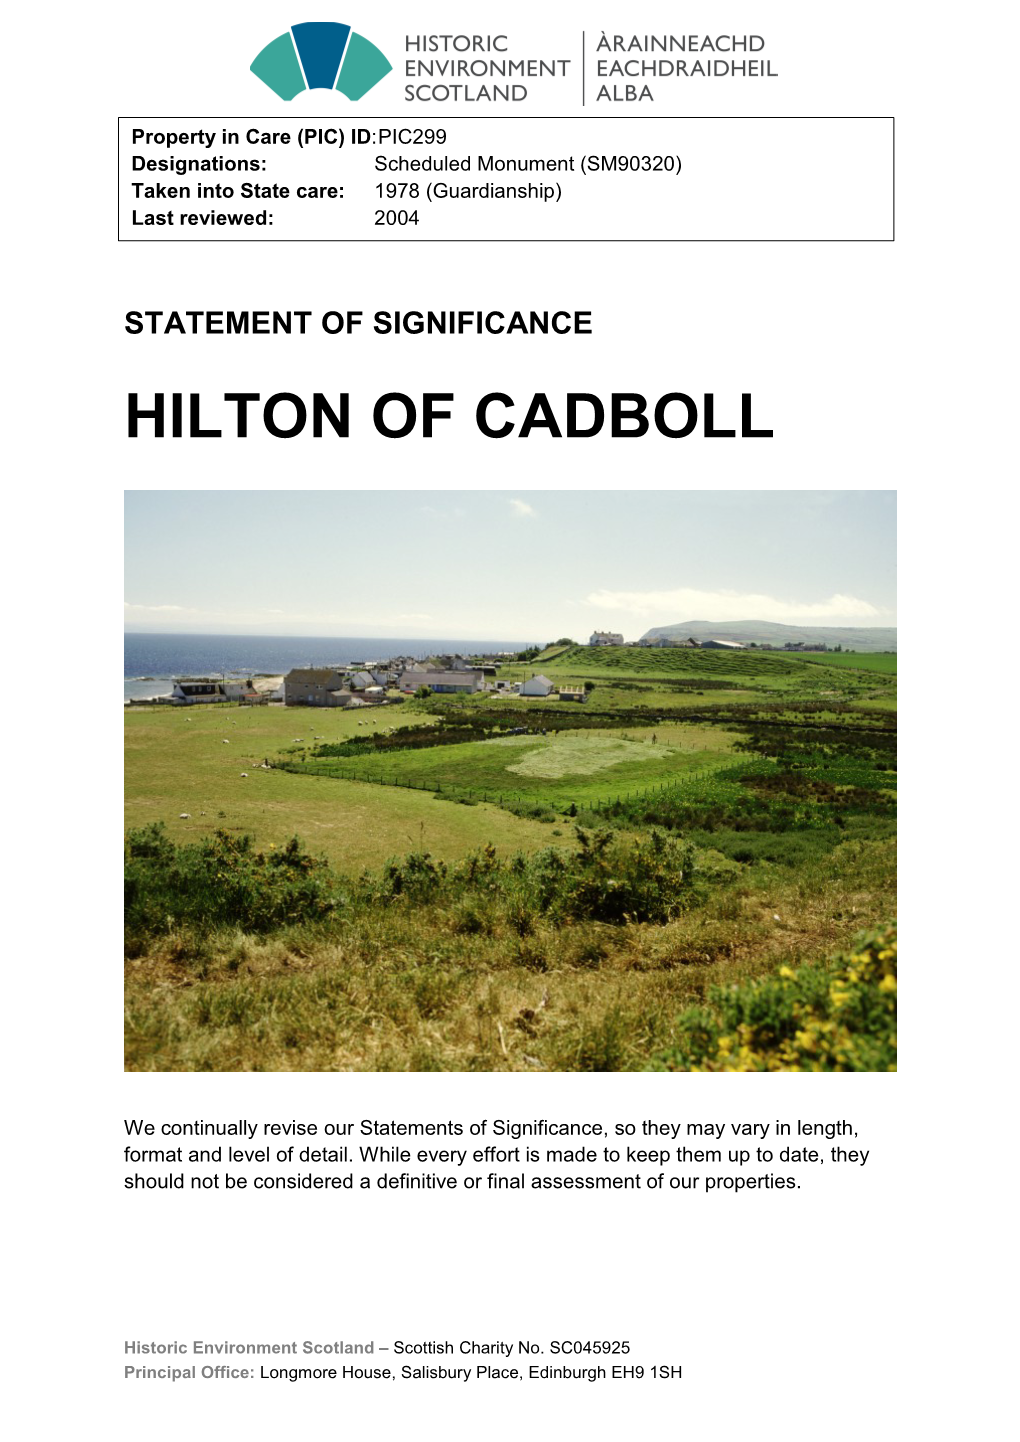 Hilton of Cadboll Statement of Significance